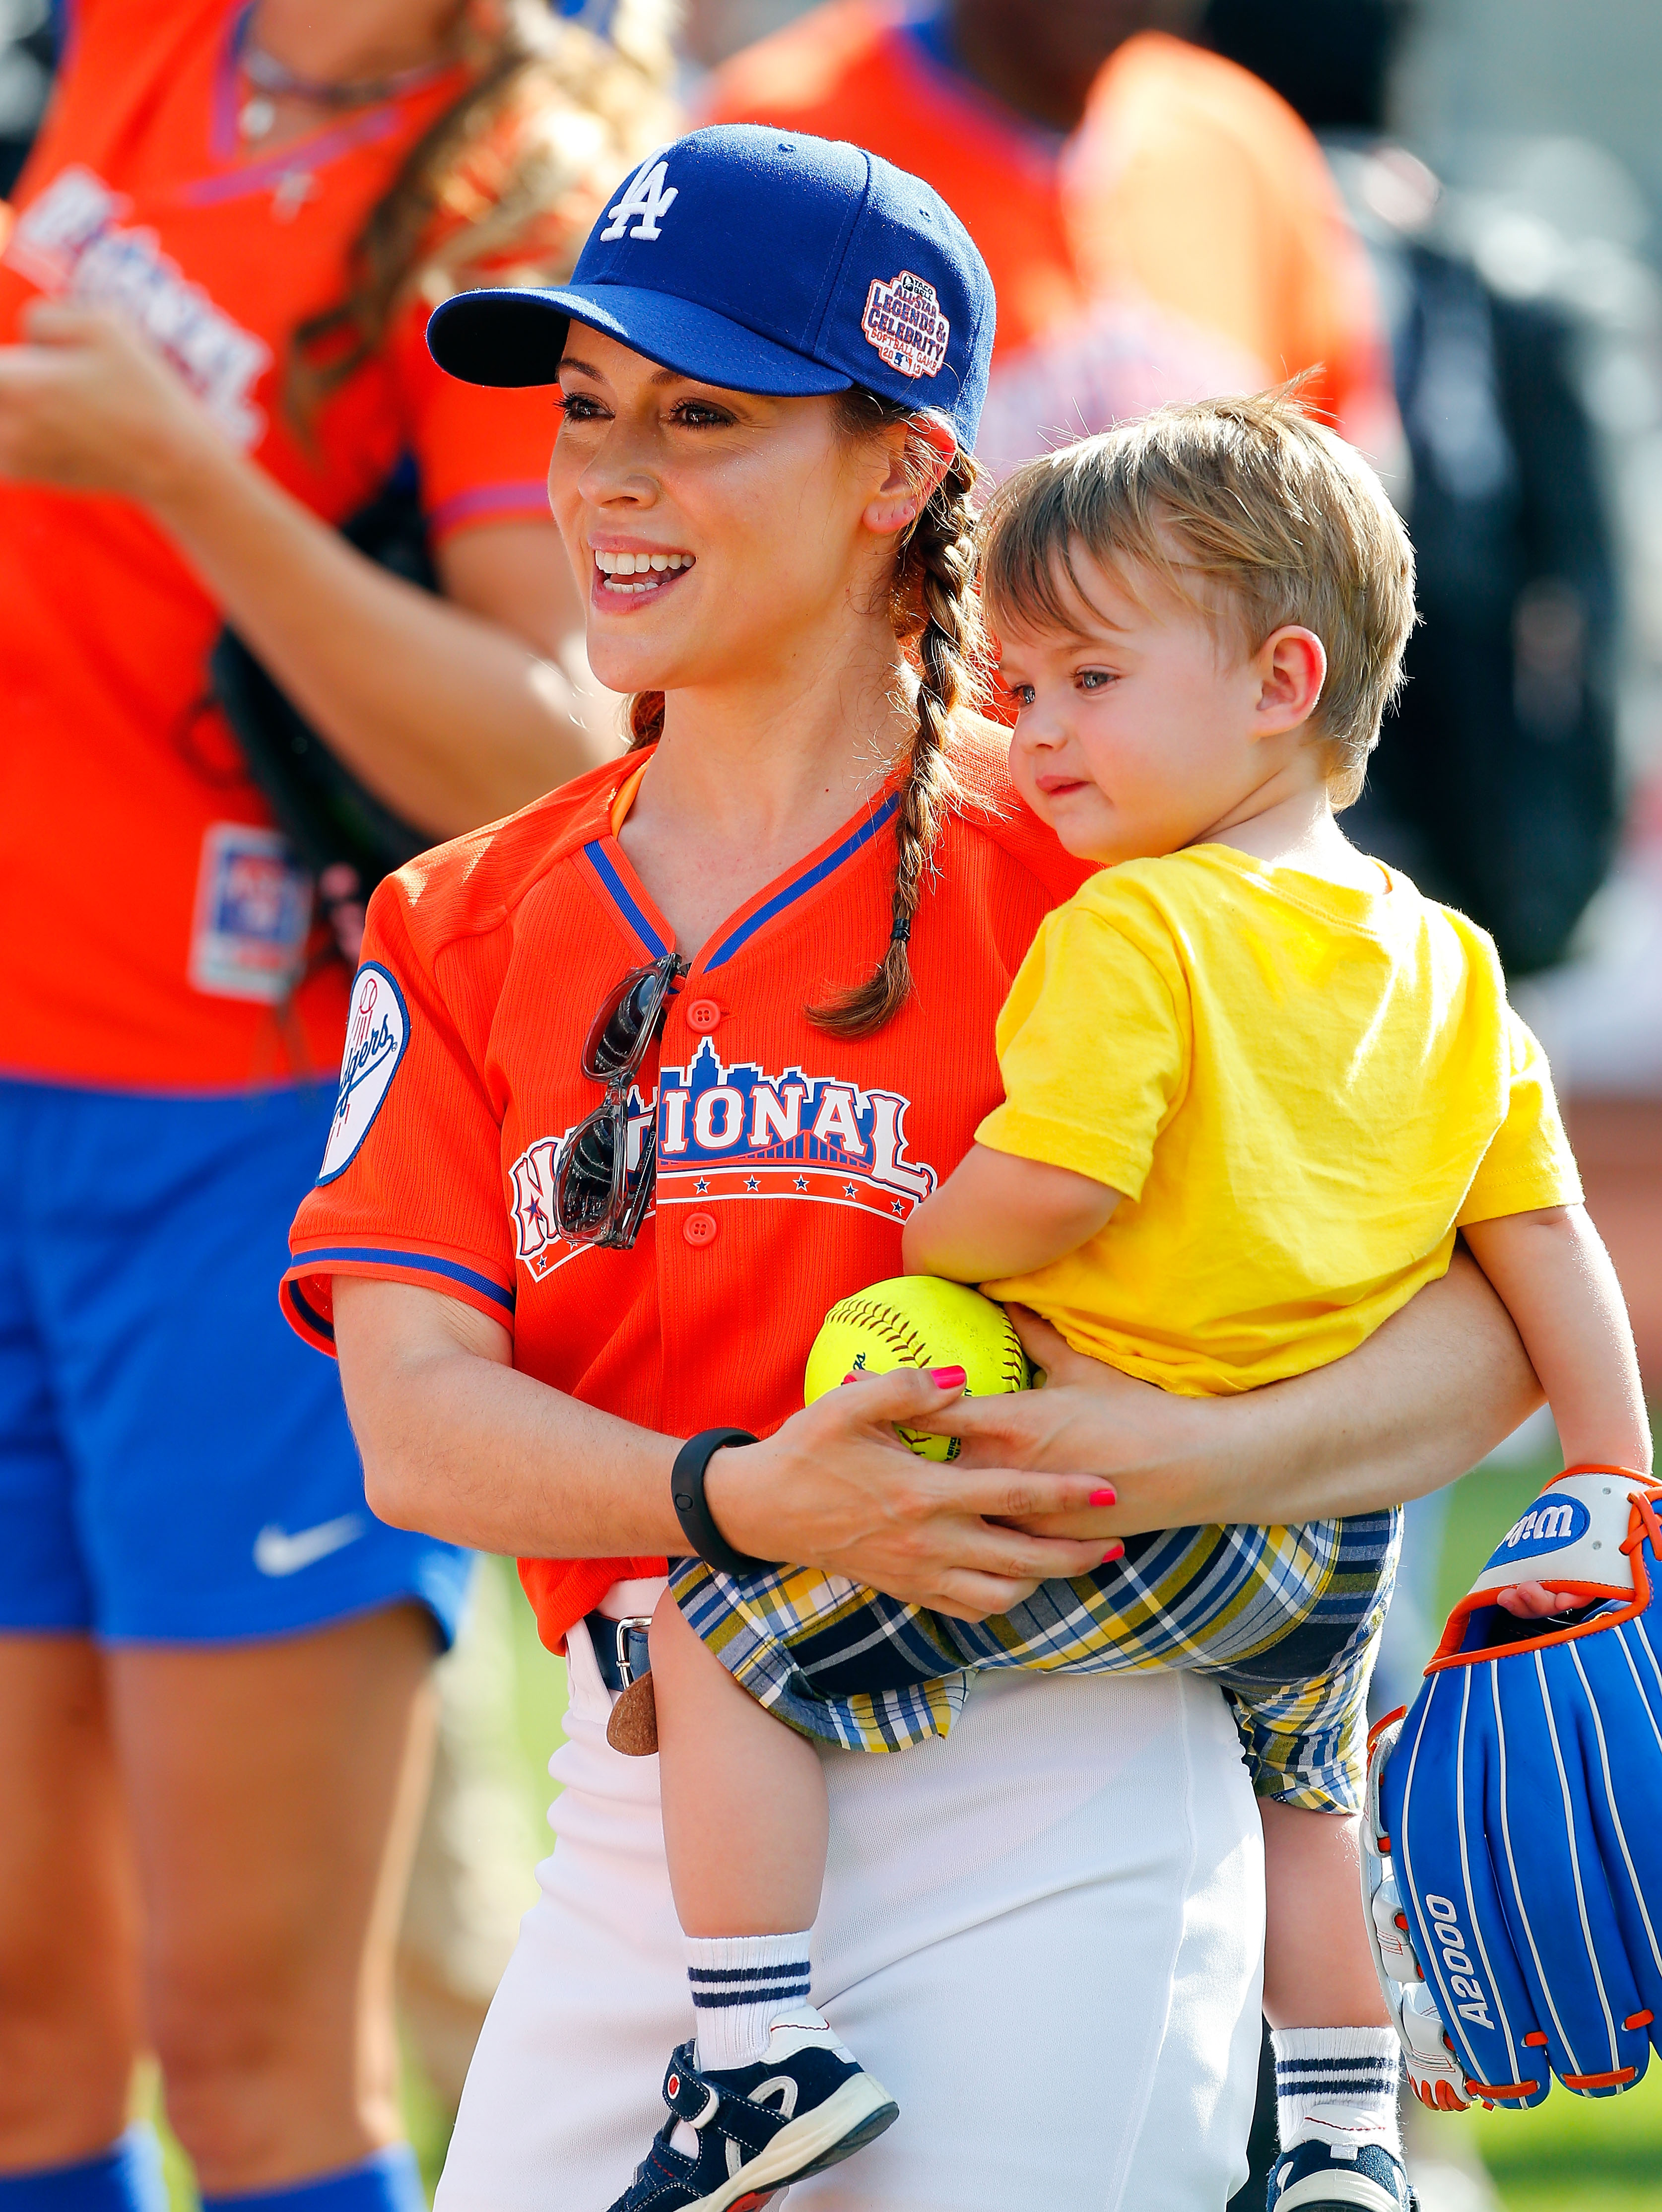 Alyssa Milano and Milo Thomas Bugliari during the Taco Bell All-Star Legends & Celebrity Softball Game at Citi Field on July 14, 2013 in New York City | Source: Getty Images